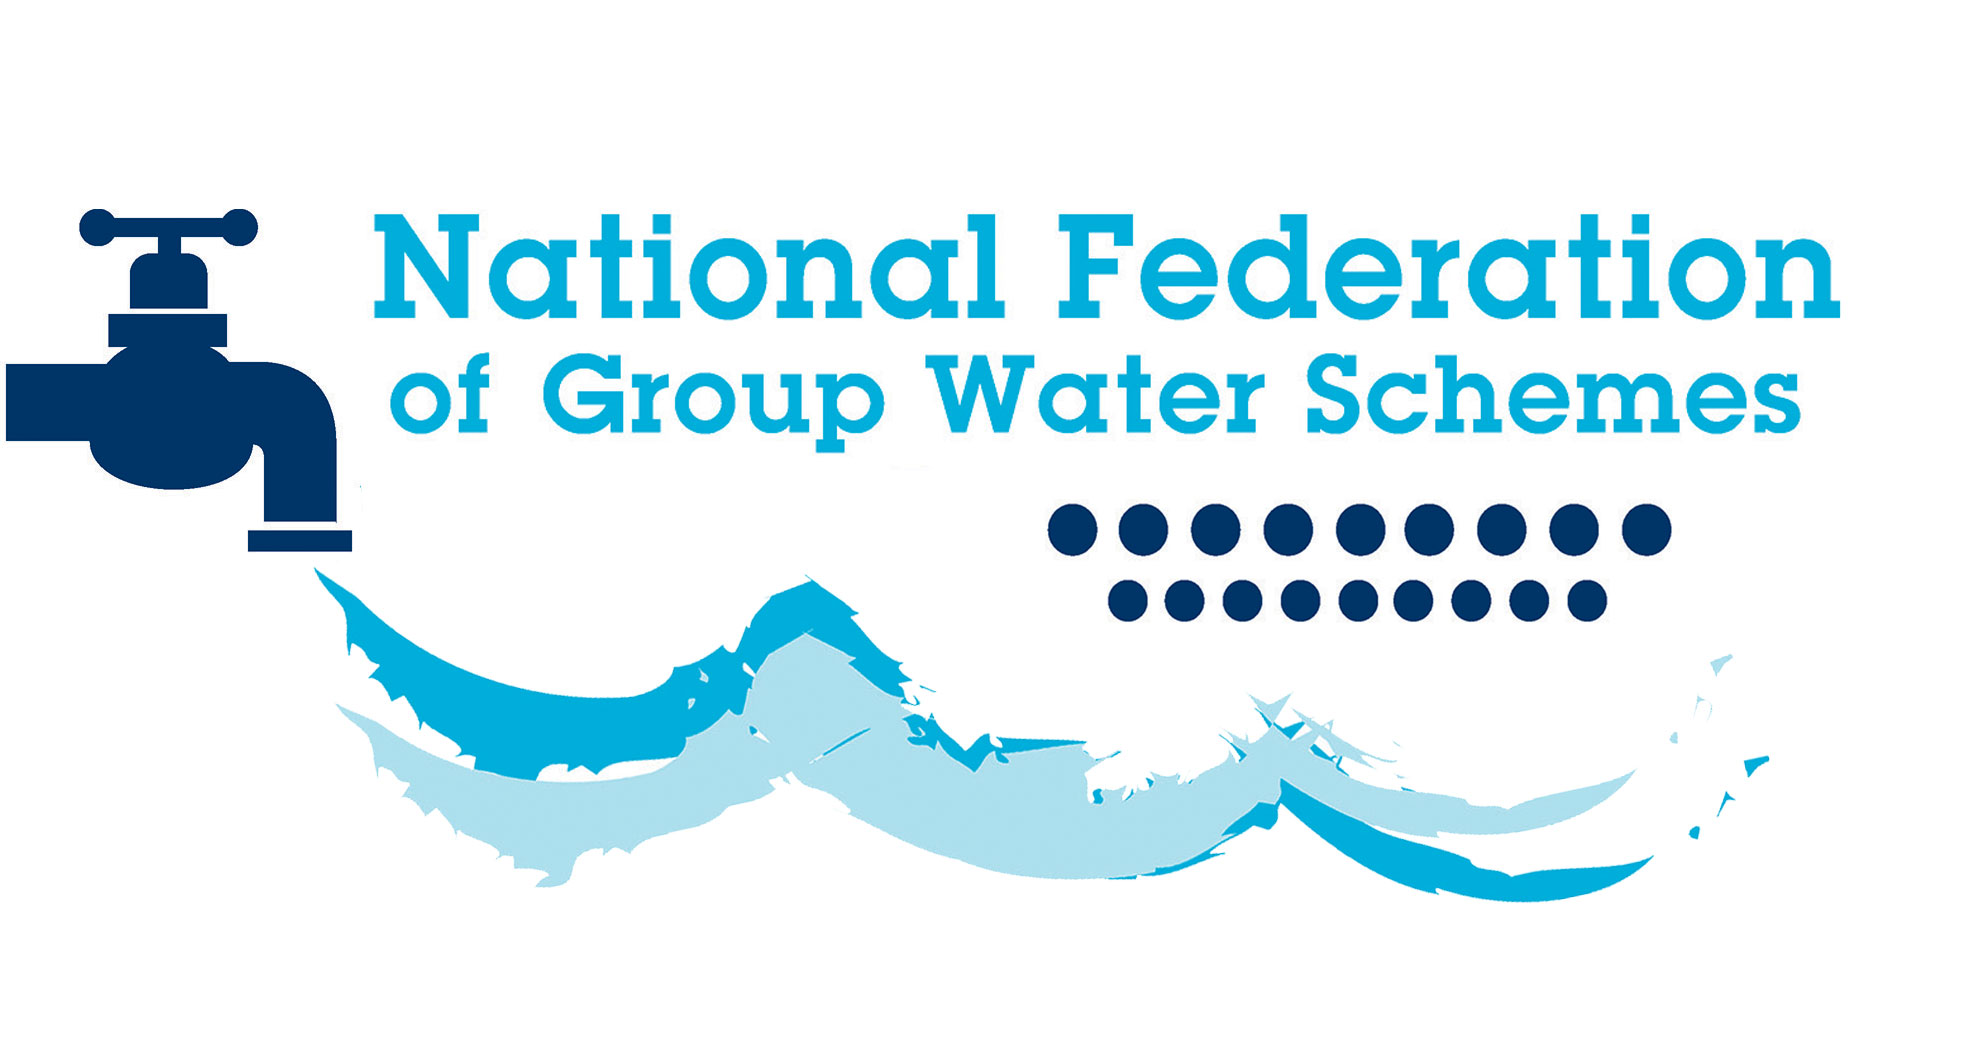 National Federation of Group Water Schemes